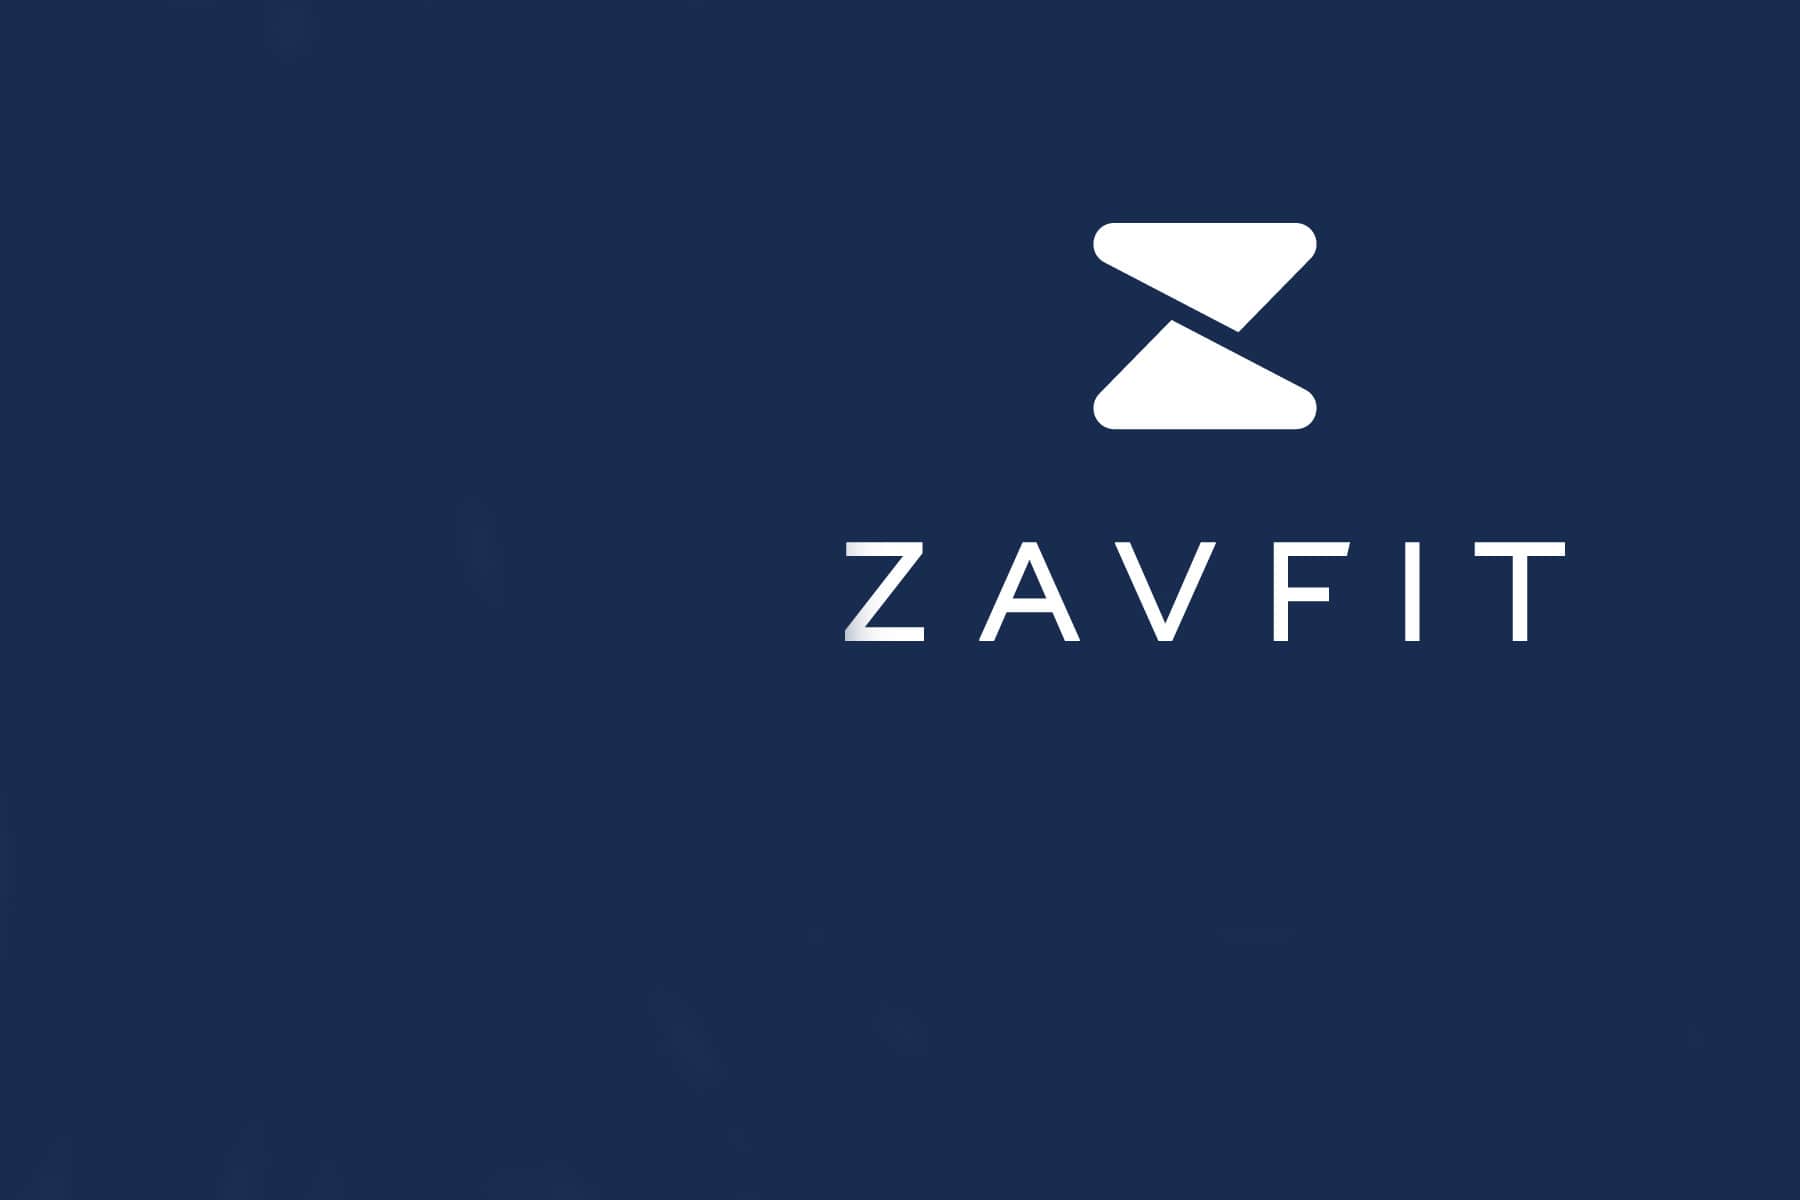 PCA promotes financial wellbeing with ZavFit